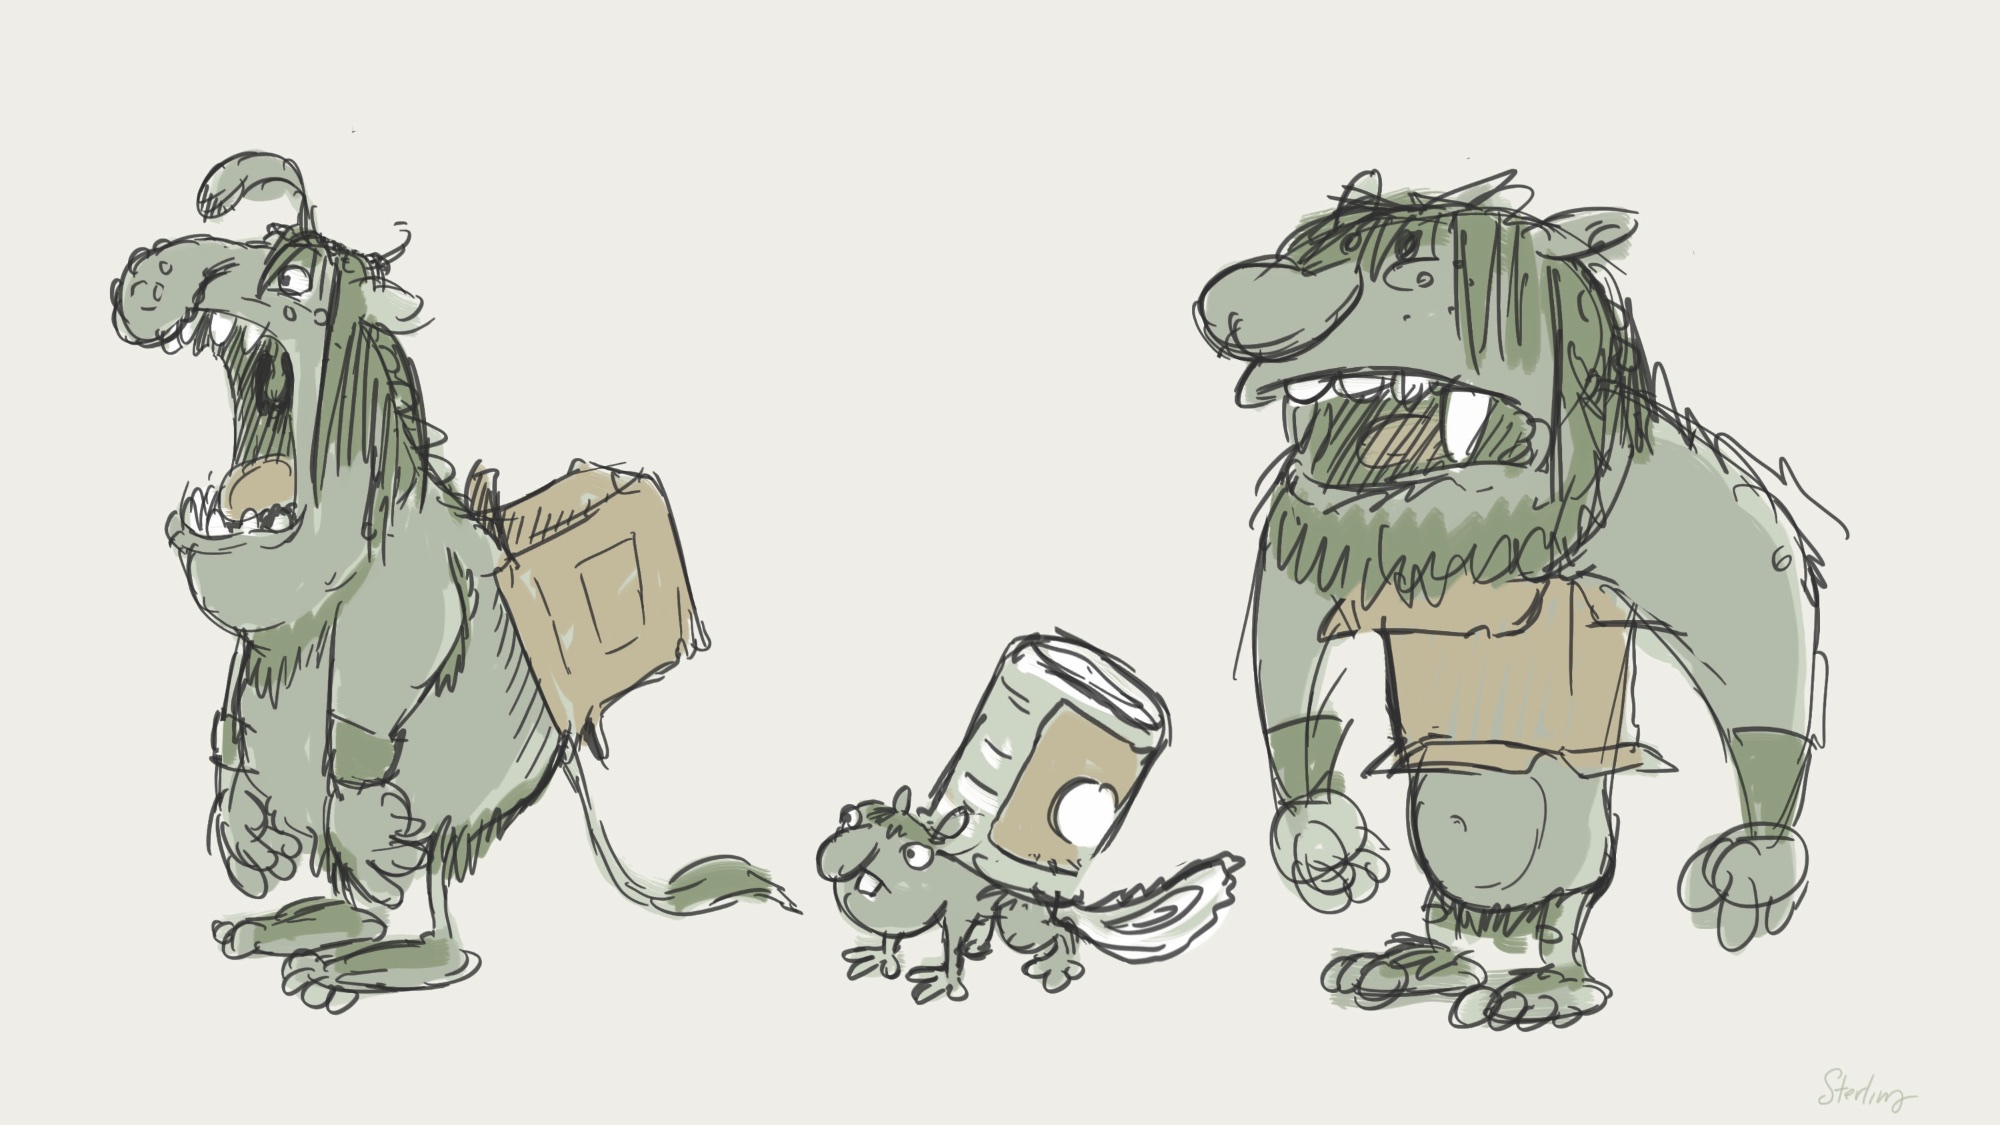 more box monsters